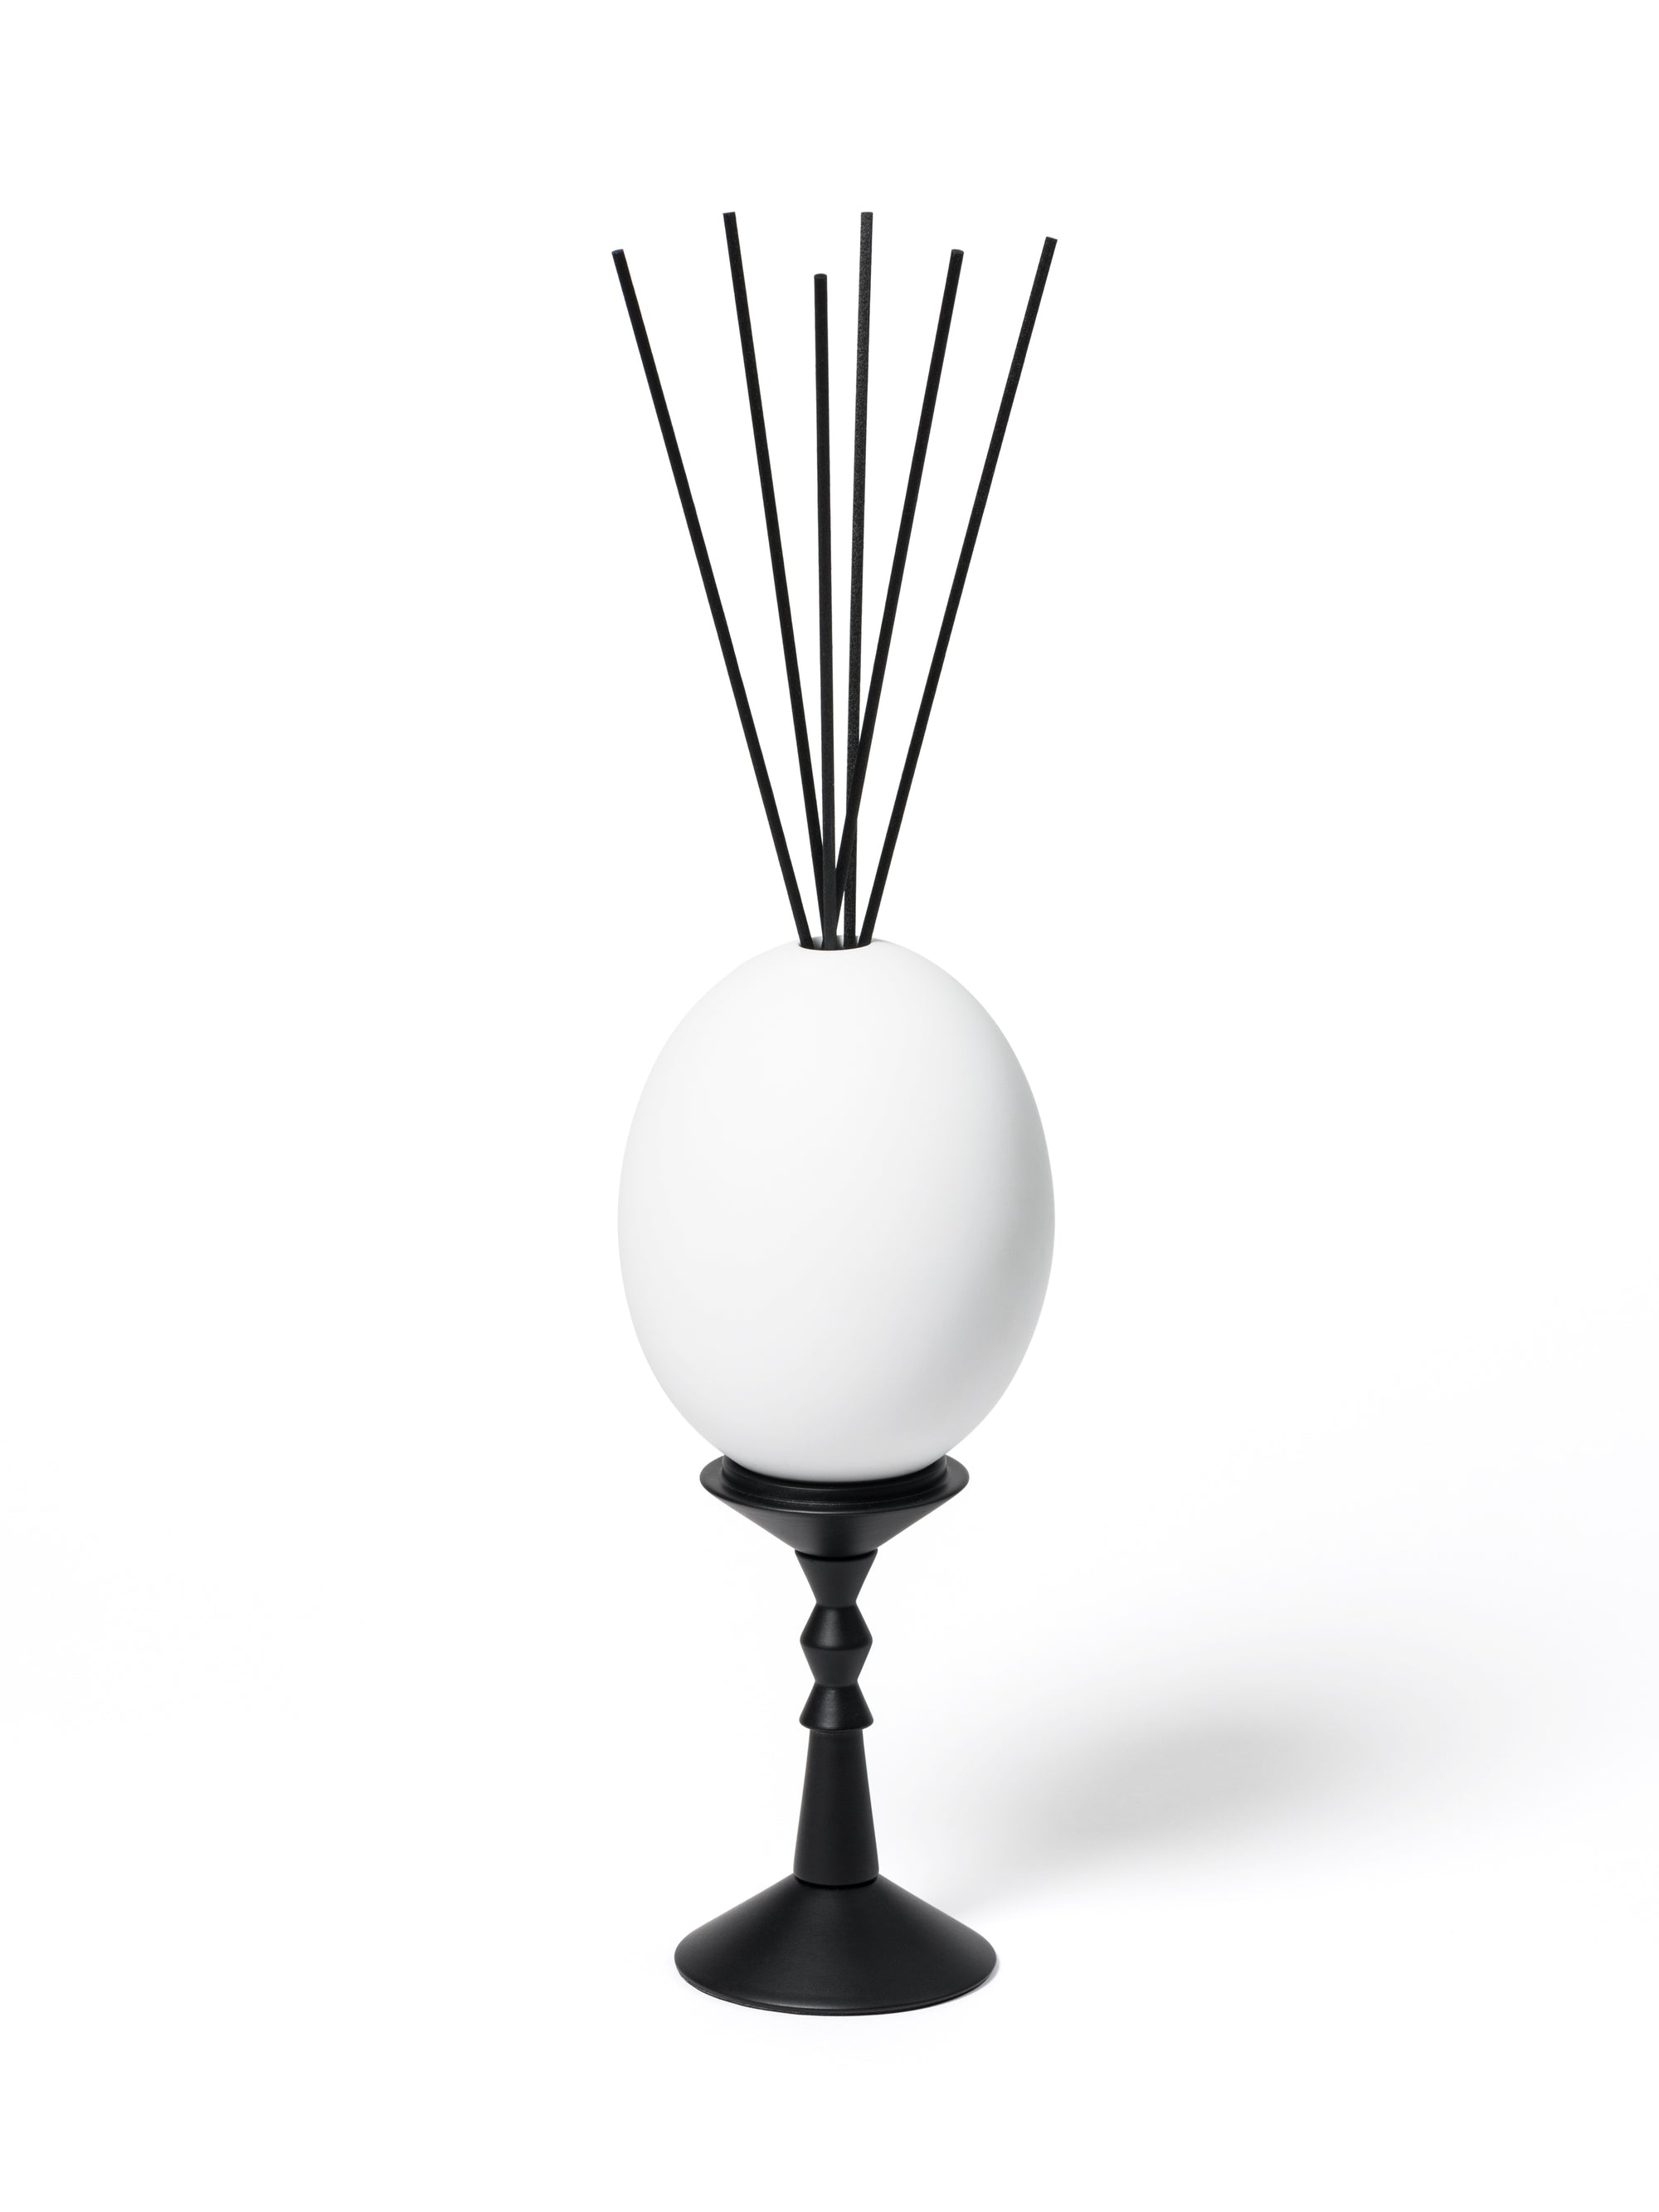 L'OEuf Egg Diffuser Cyrnos from Trudon